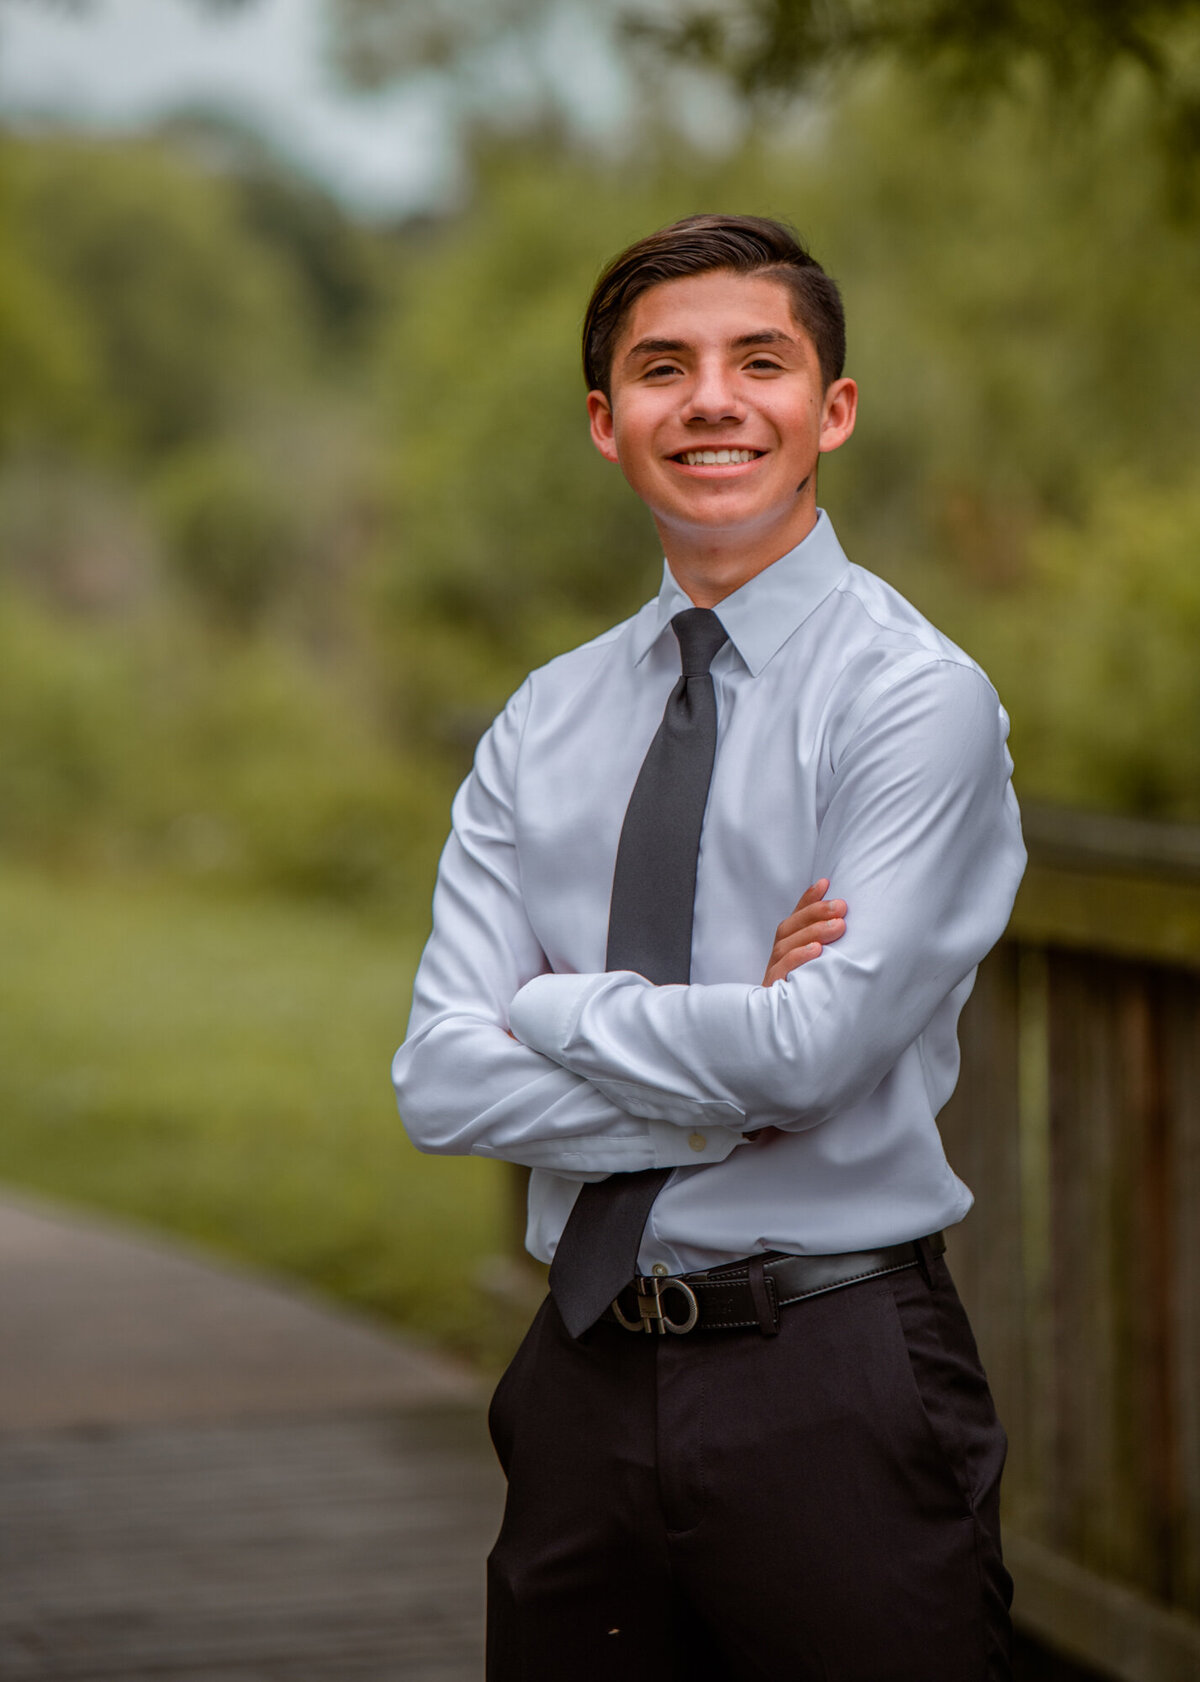 A Pearland senior stands on a wooden bridge with his arms folded while he smiles at the camera.